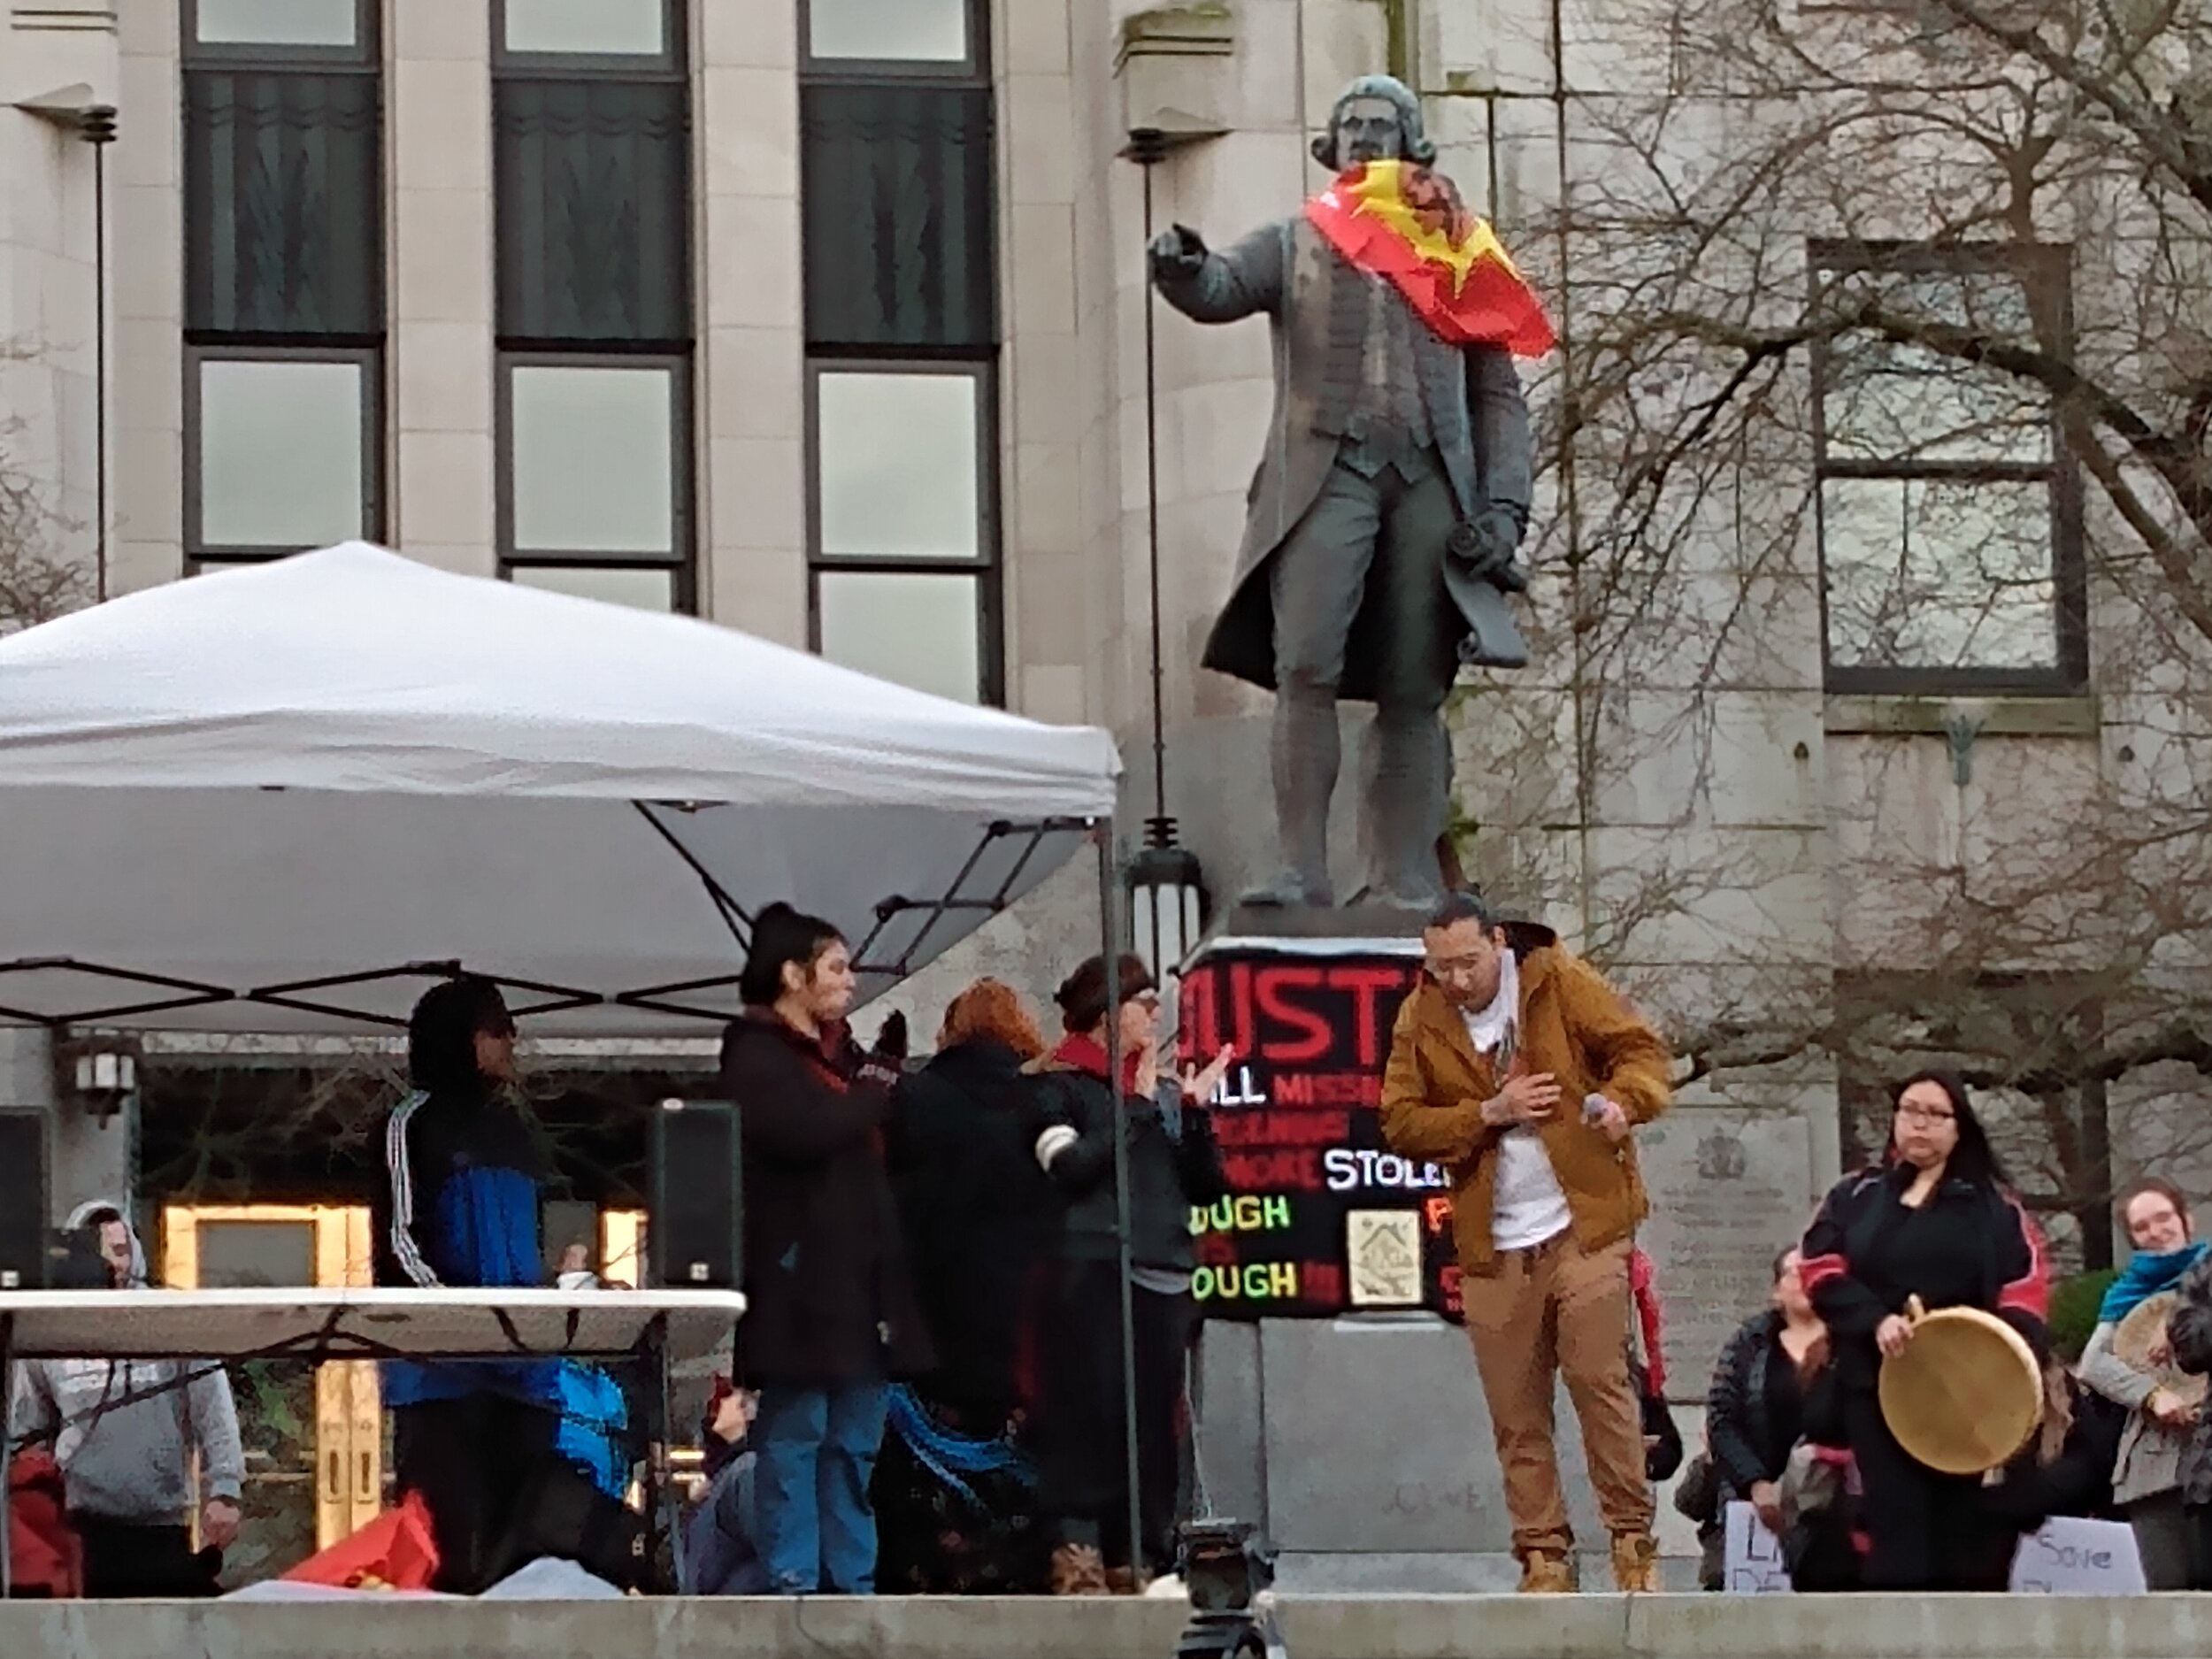 Student walkout, rally, and march in solidarity with Wet'suwet'en - Vancouver, Jan 2020 (3).jpg